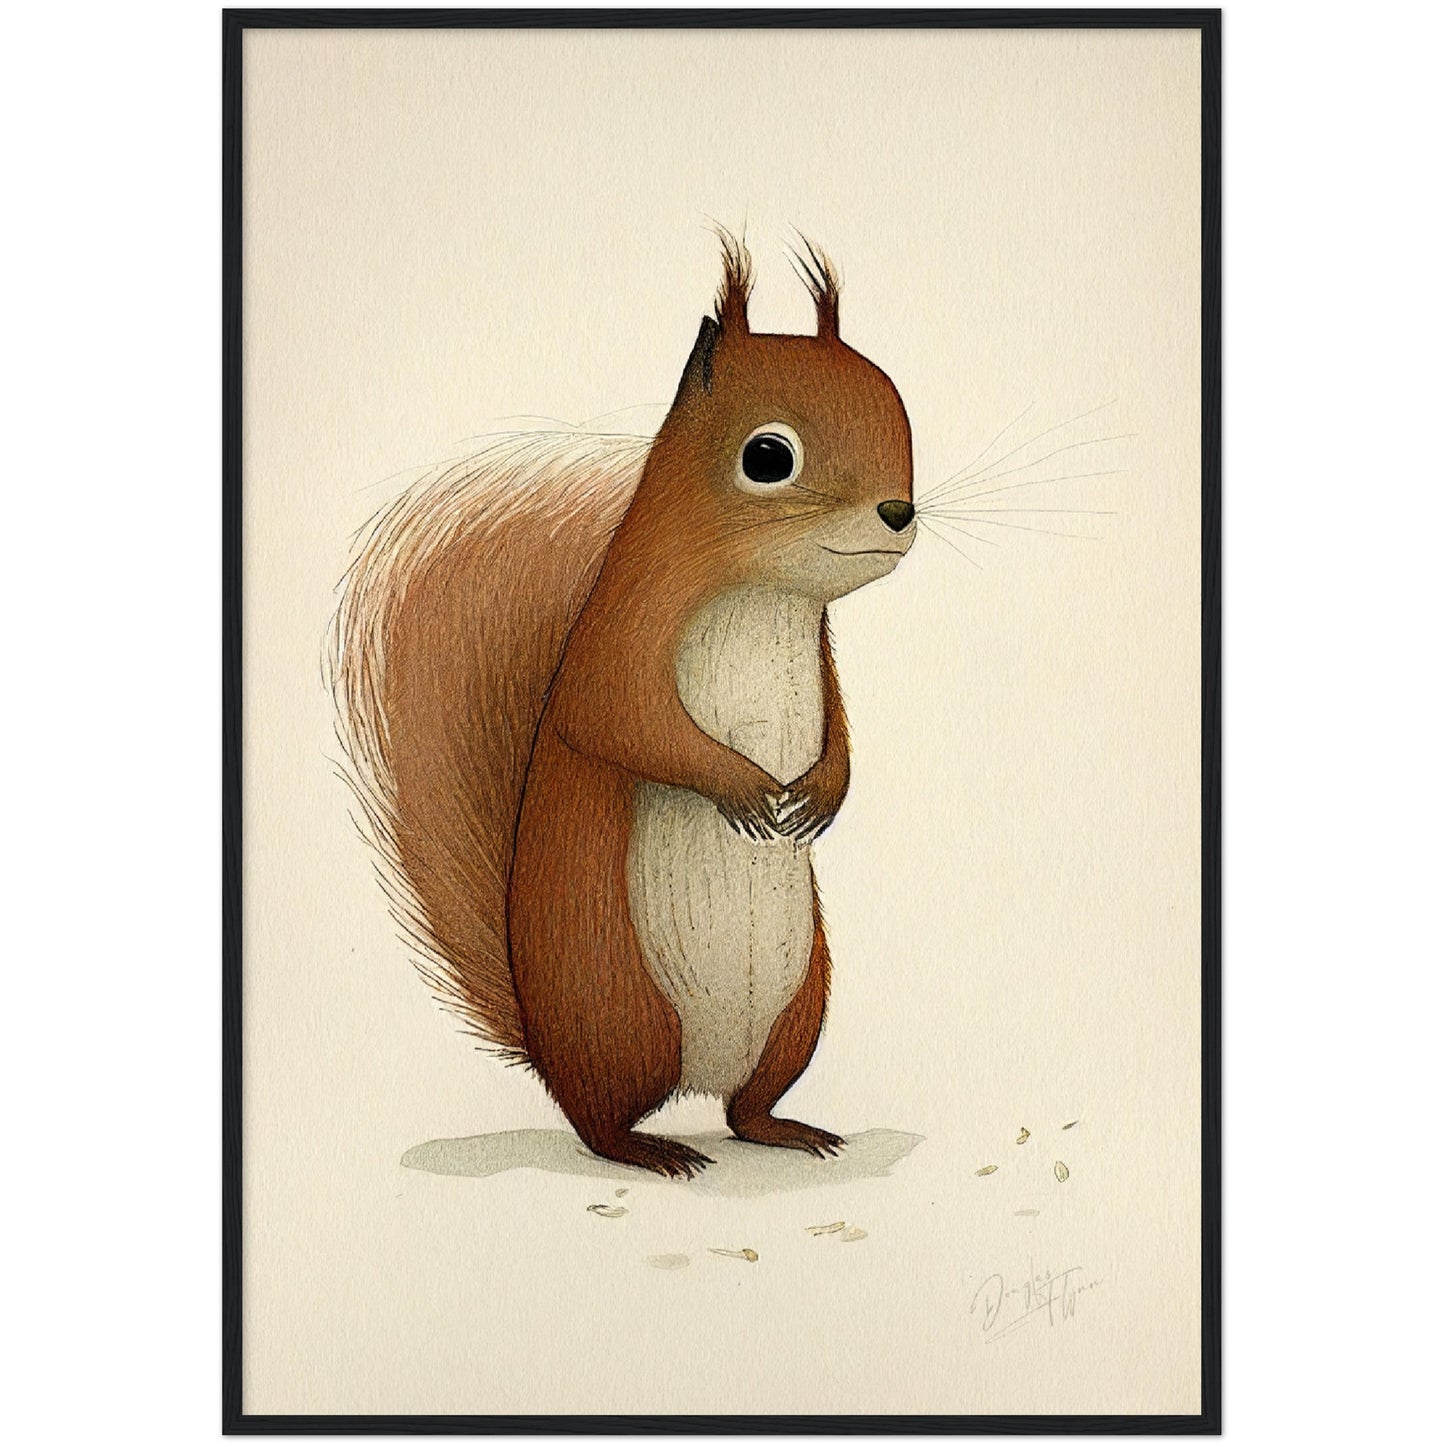 »Squirrel Scratch And Reflect« retro poster